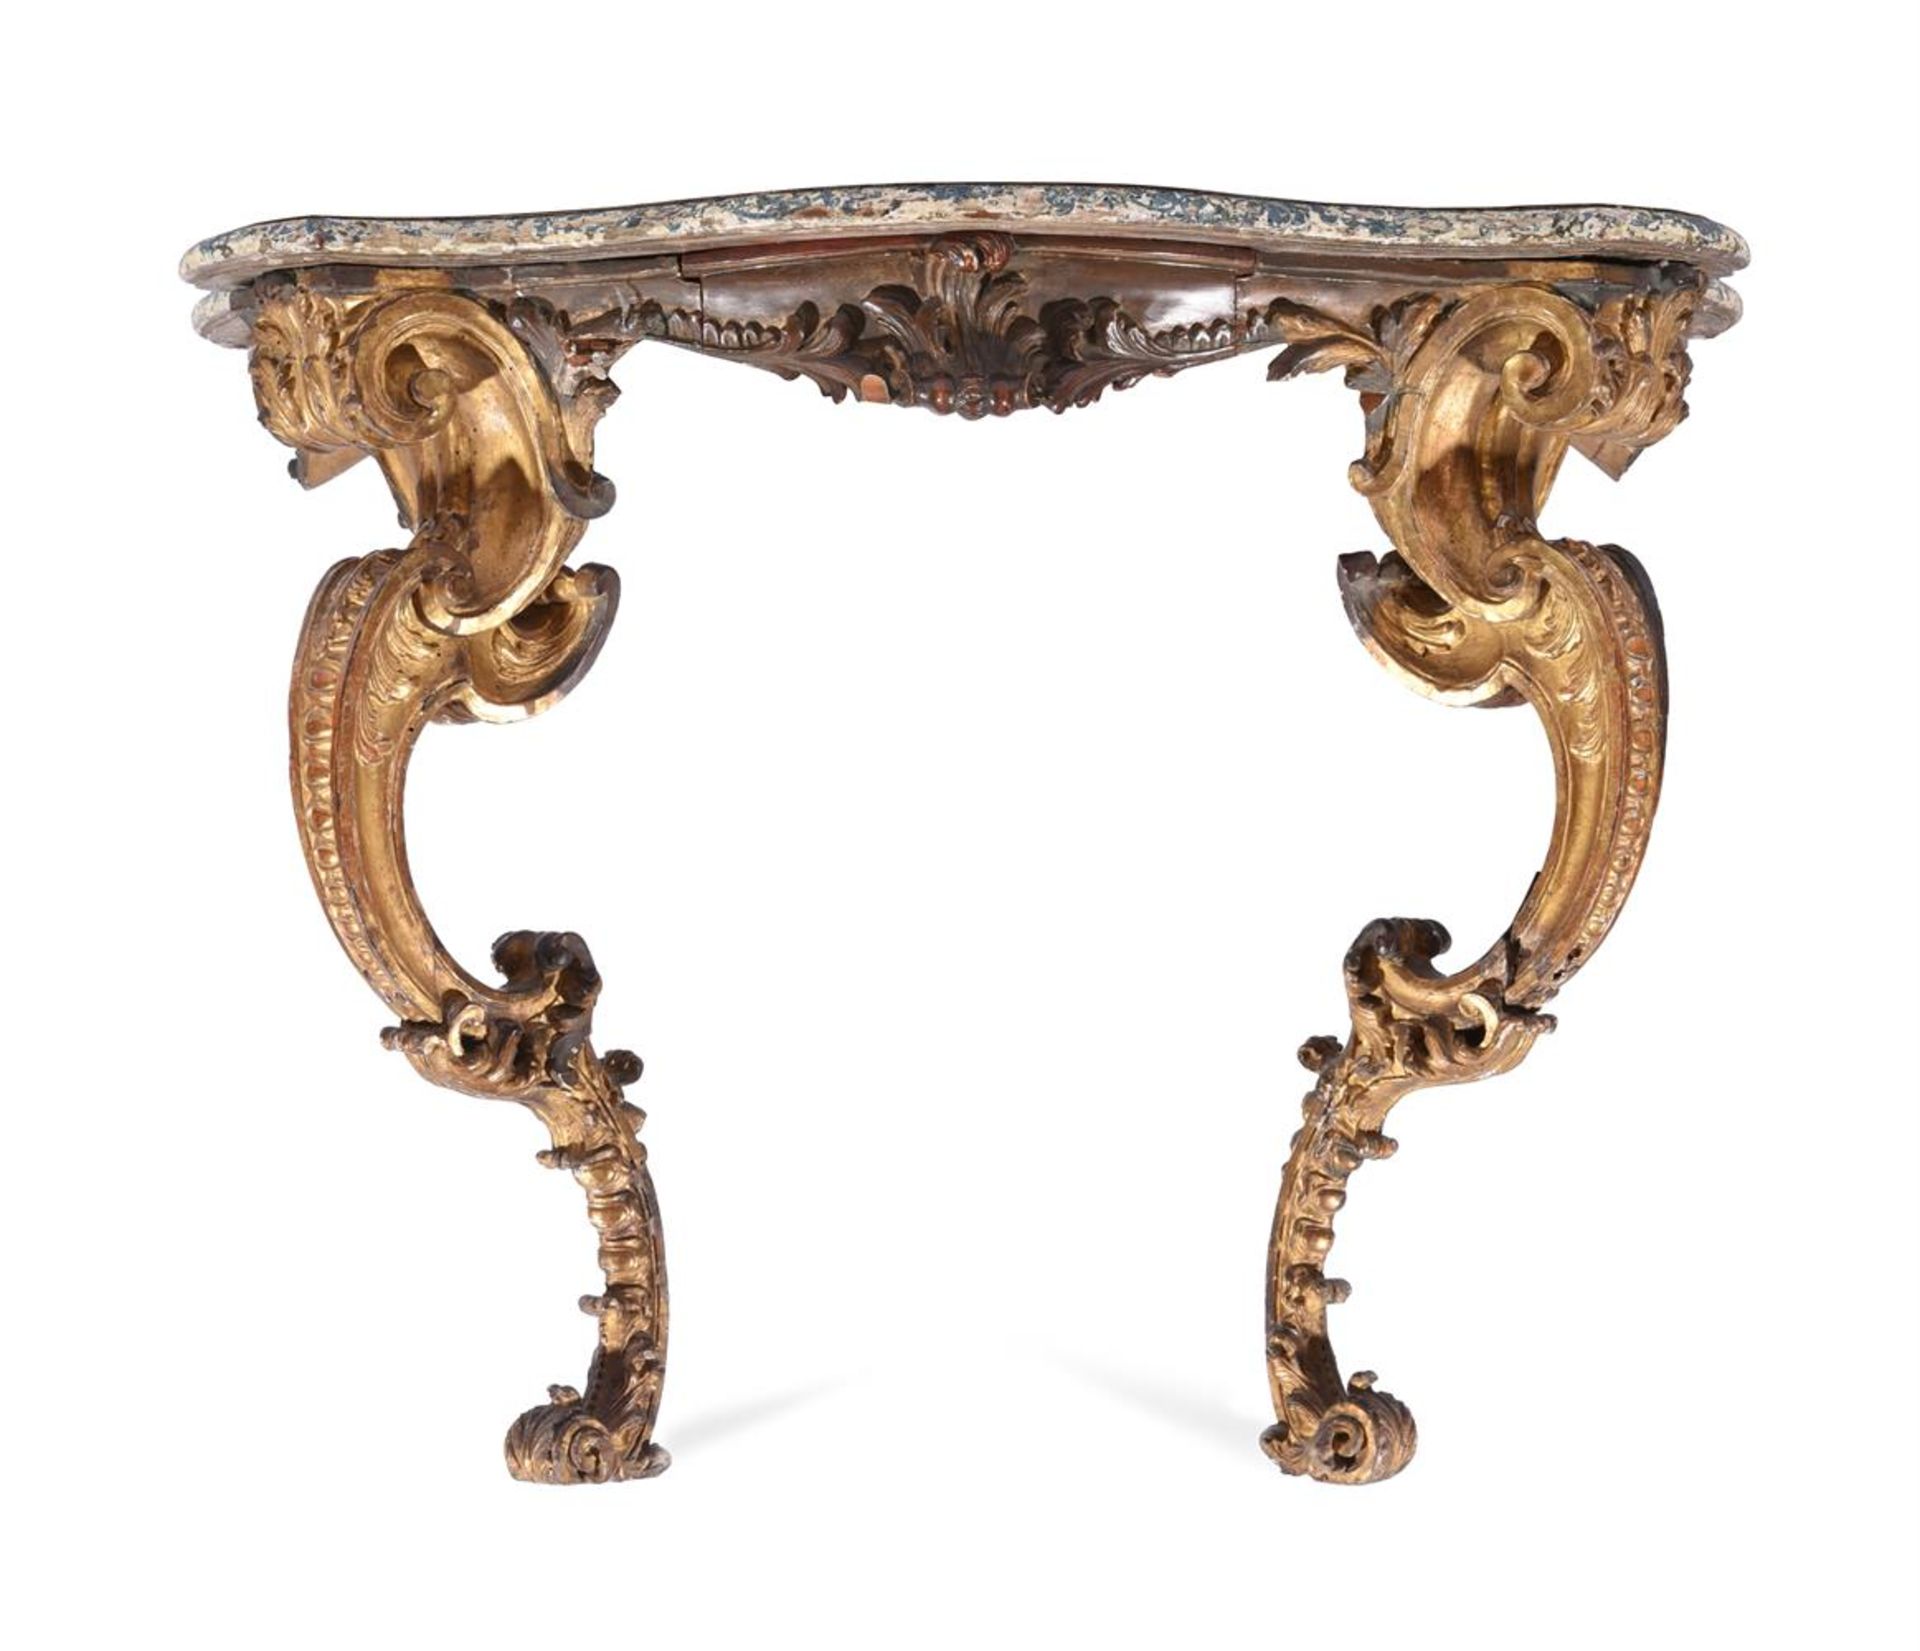 AN ITALIAN POLYCHROME PAINTED AND CARVED GILTWOOD CONSOLE TABLE, 18TH CENTURY